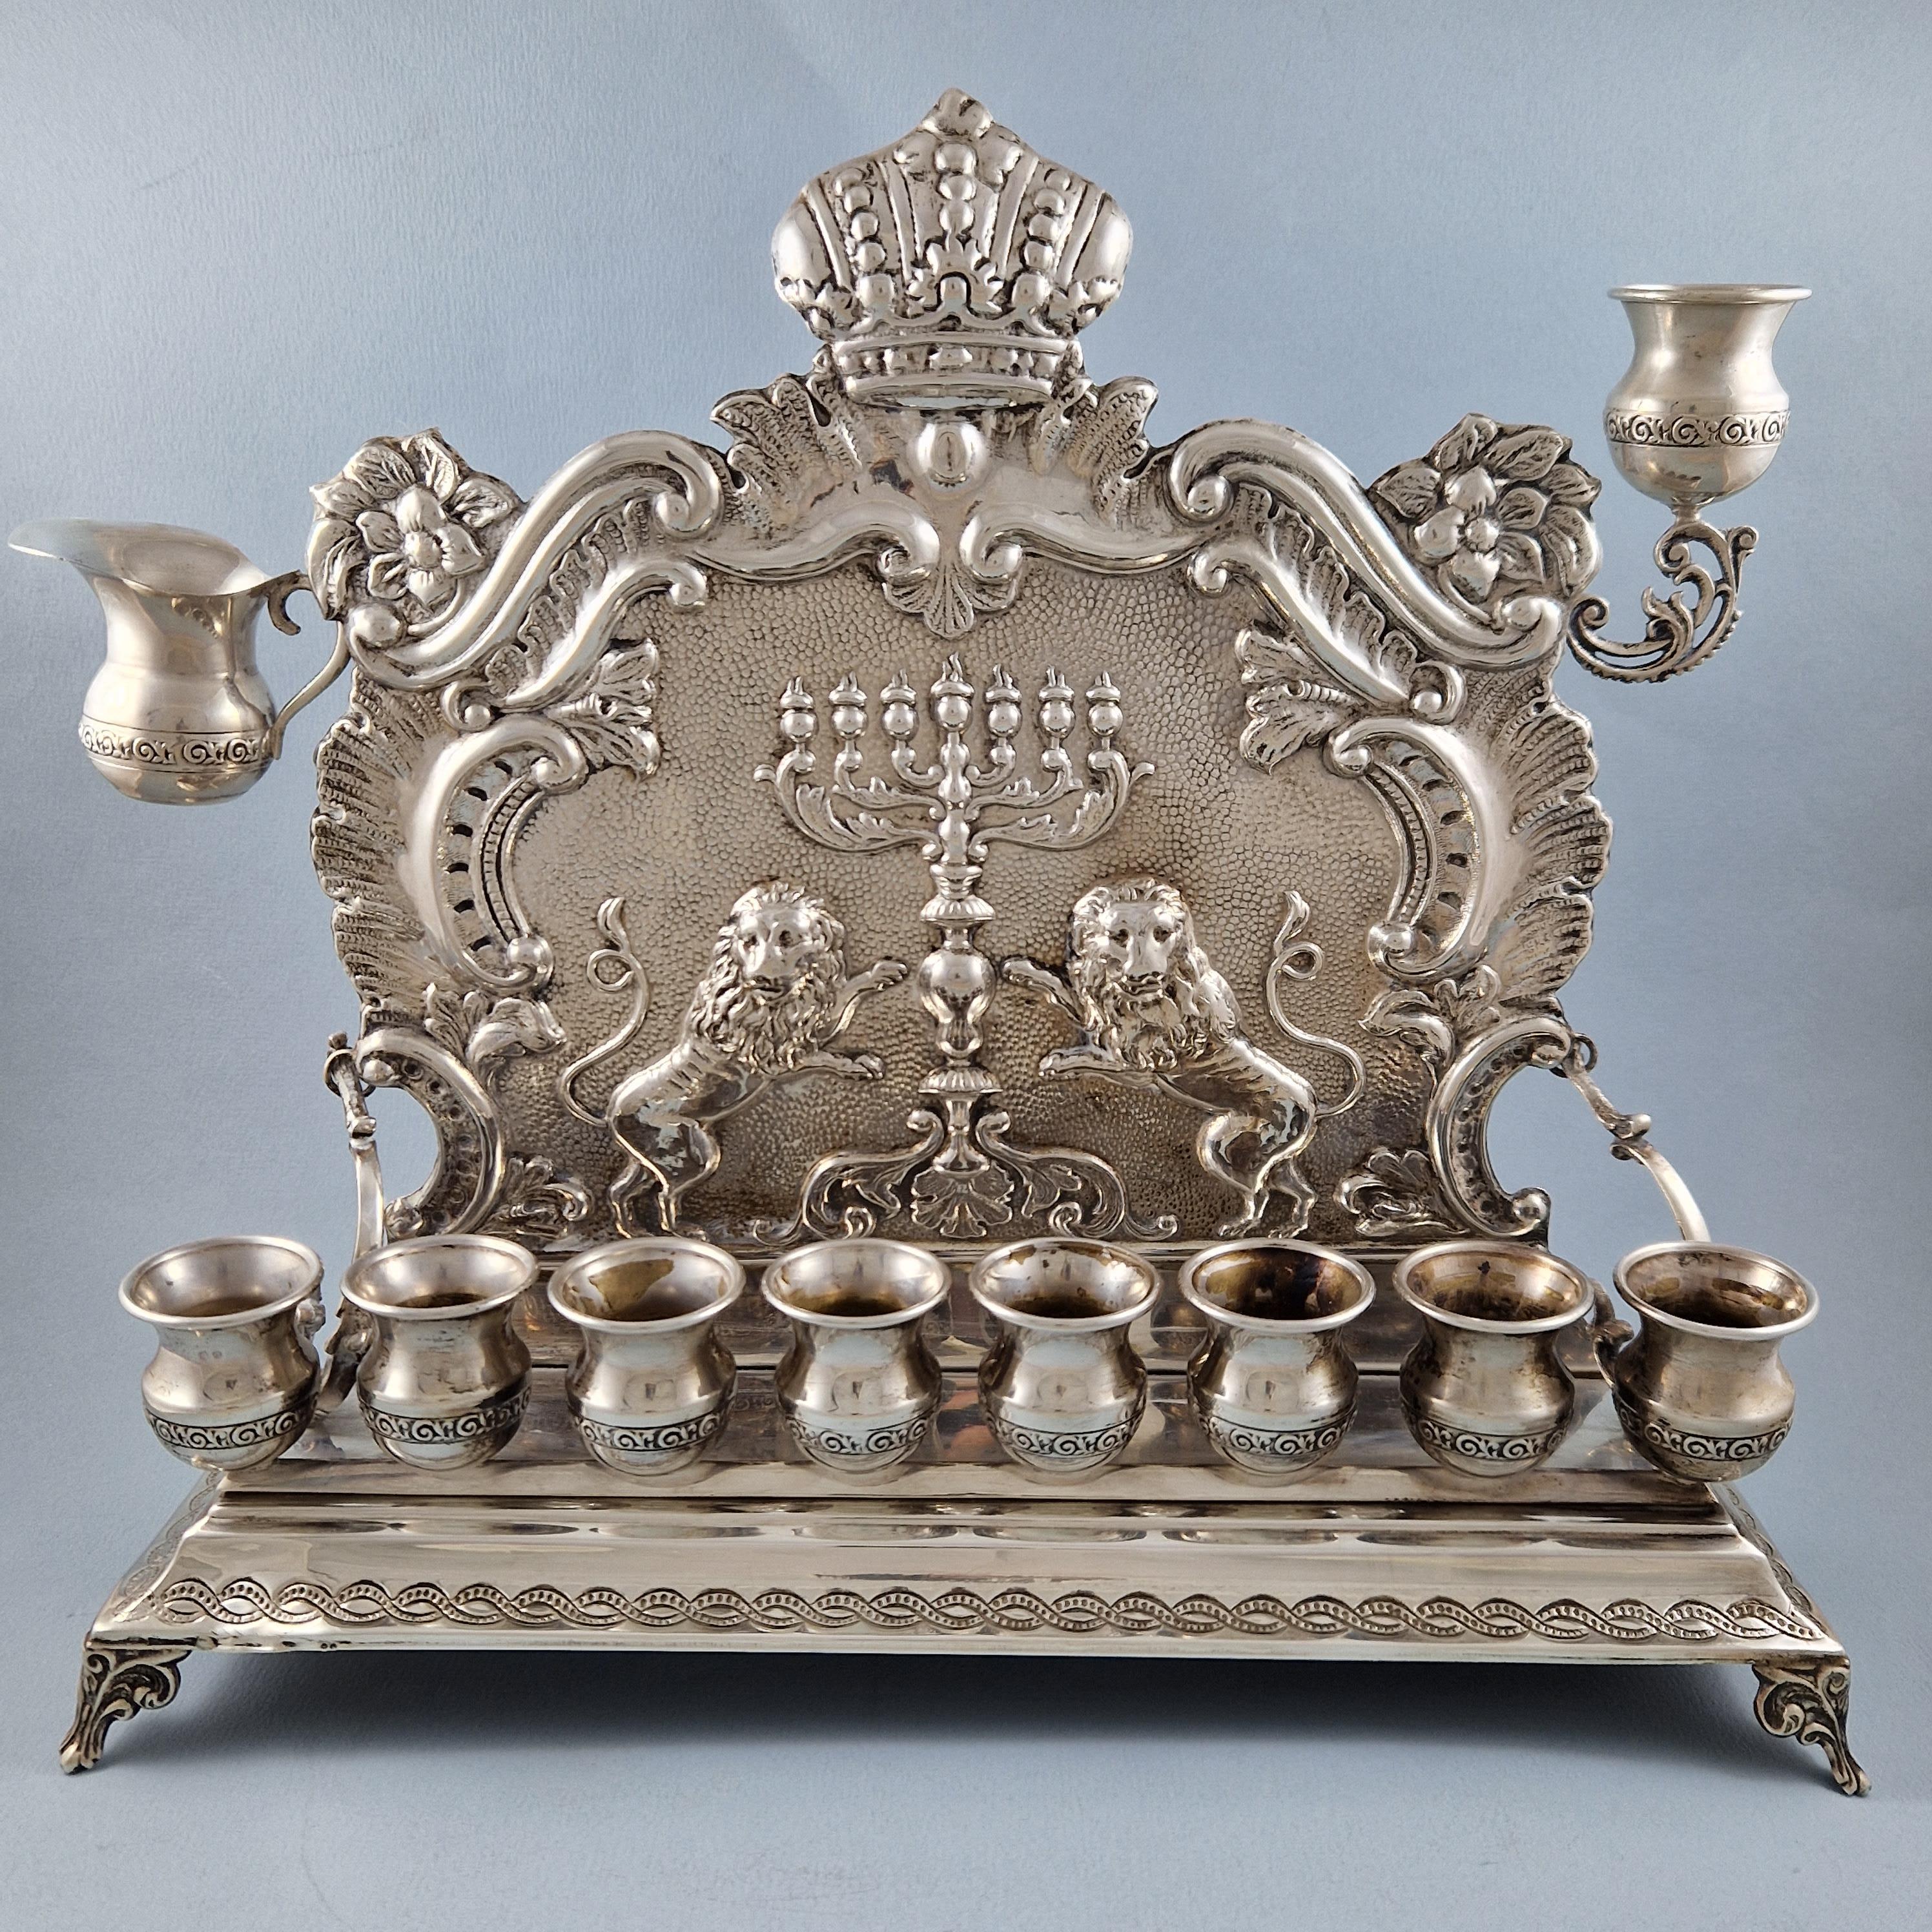 Sterling silver Hanukkah lamp 

925 silver hallmark 

Length: 30.7 cm 
Width: 9.7 cm 
Height: 27.8 cm 
Weight: 755 grams

Good condition, just one nut is missing.